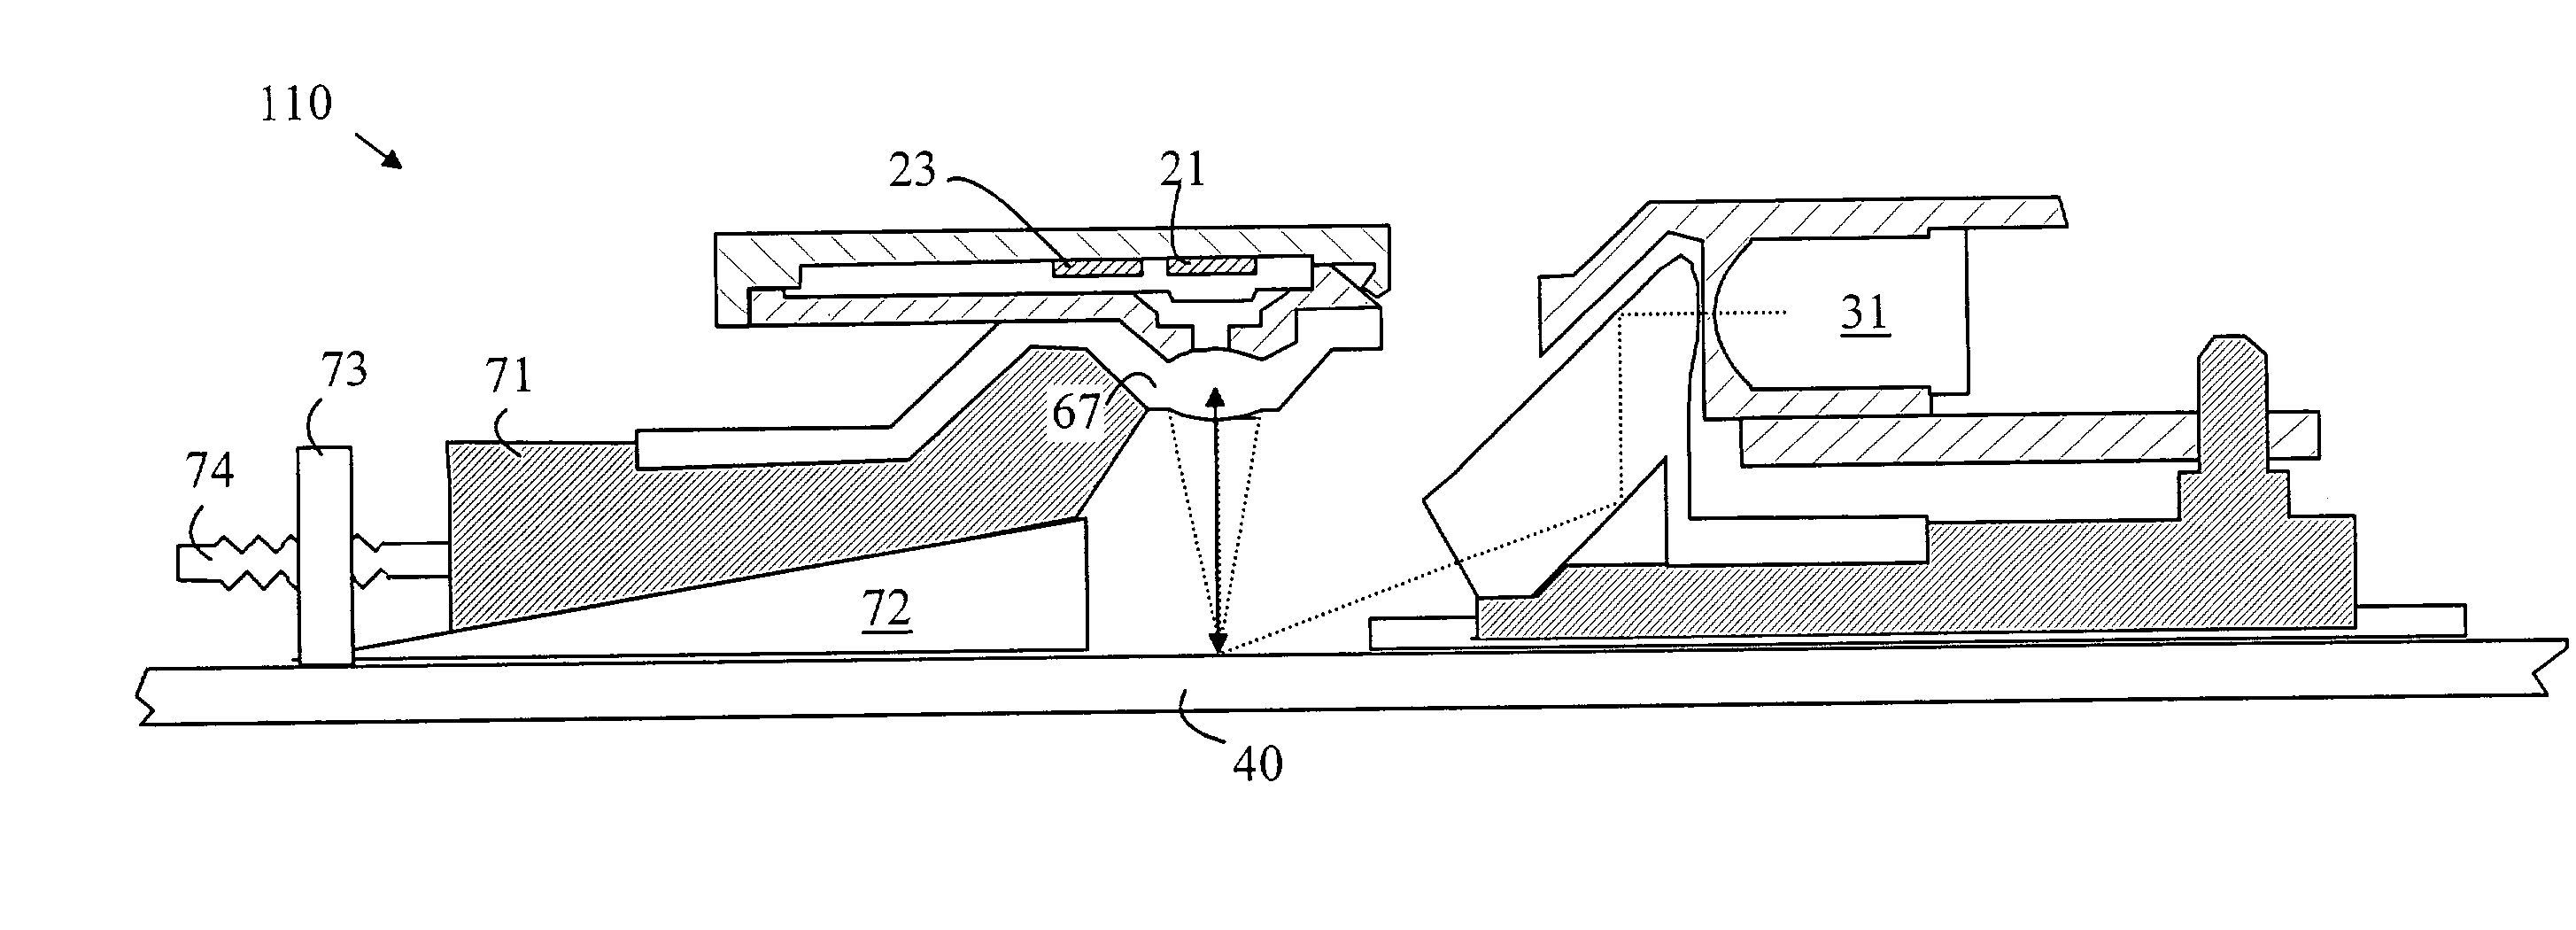 Optical mouse adapted for use on glass surfaces